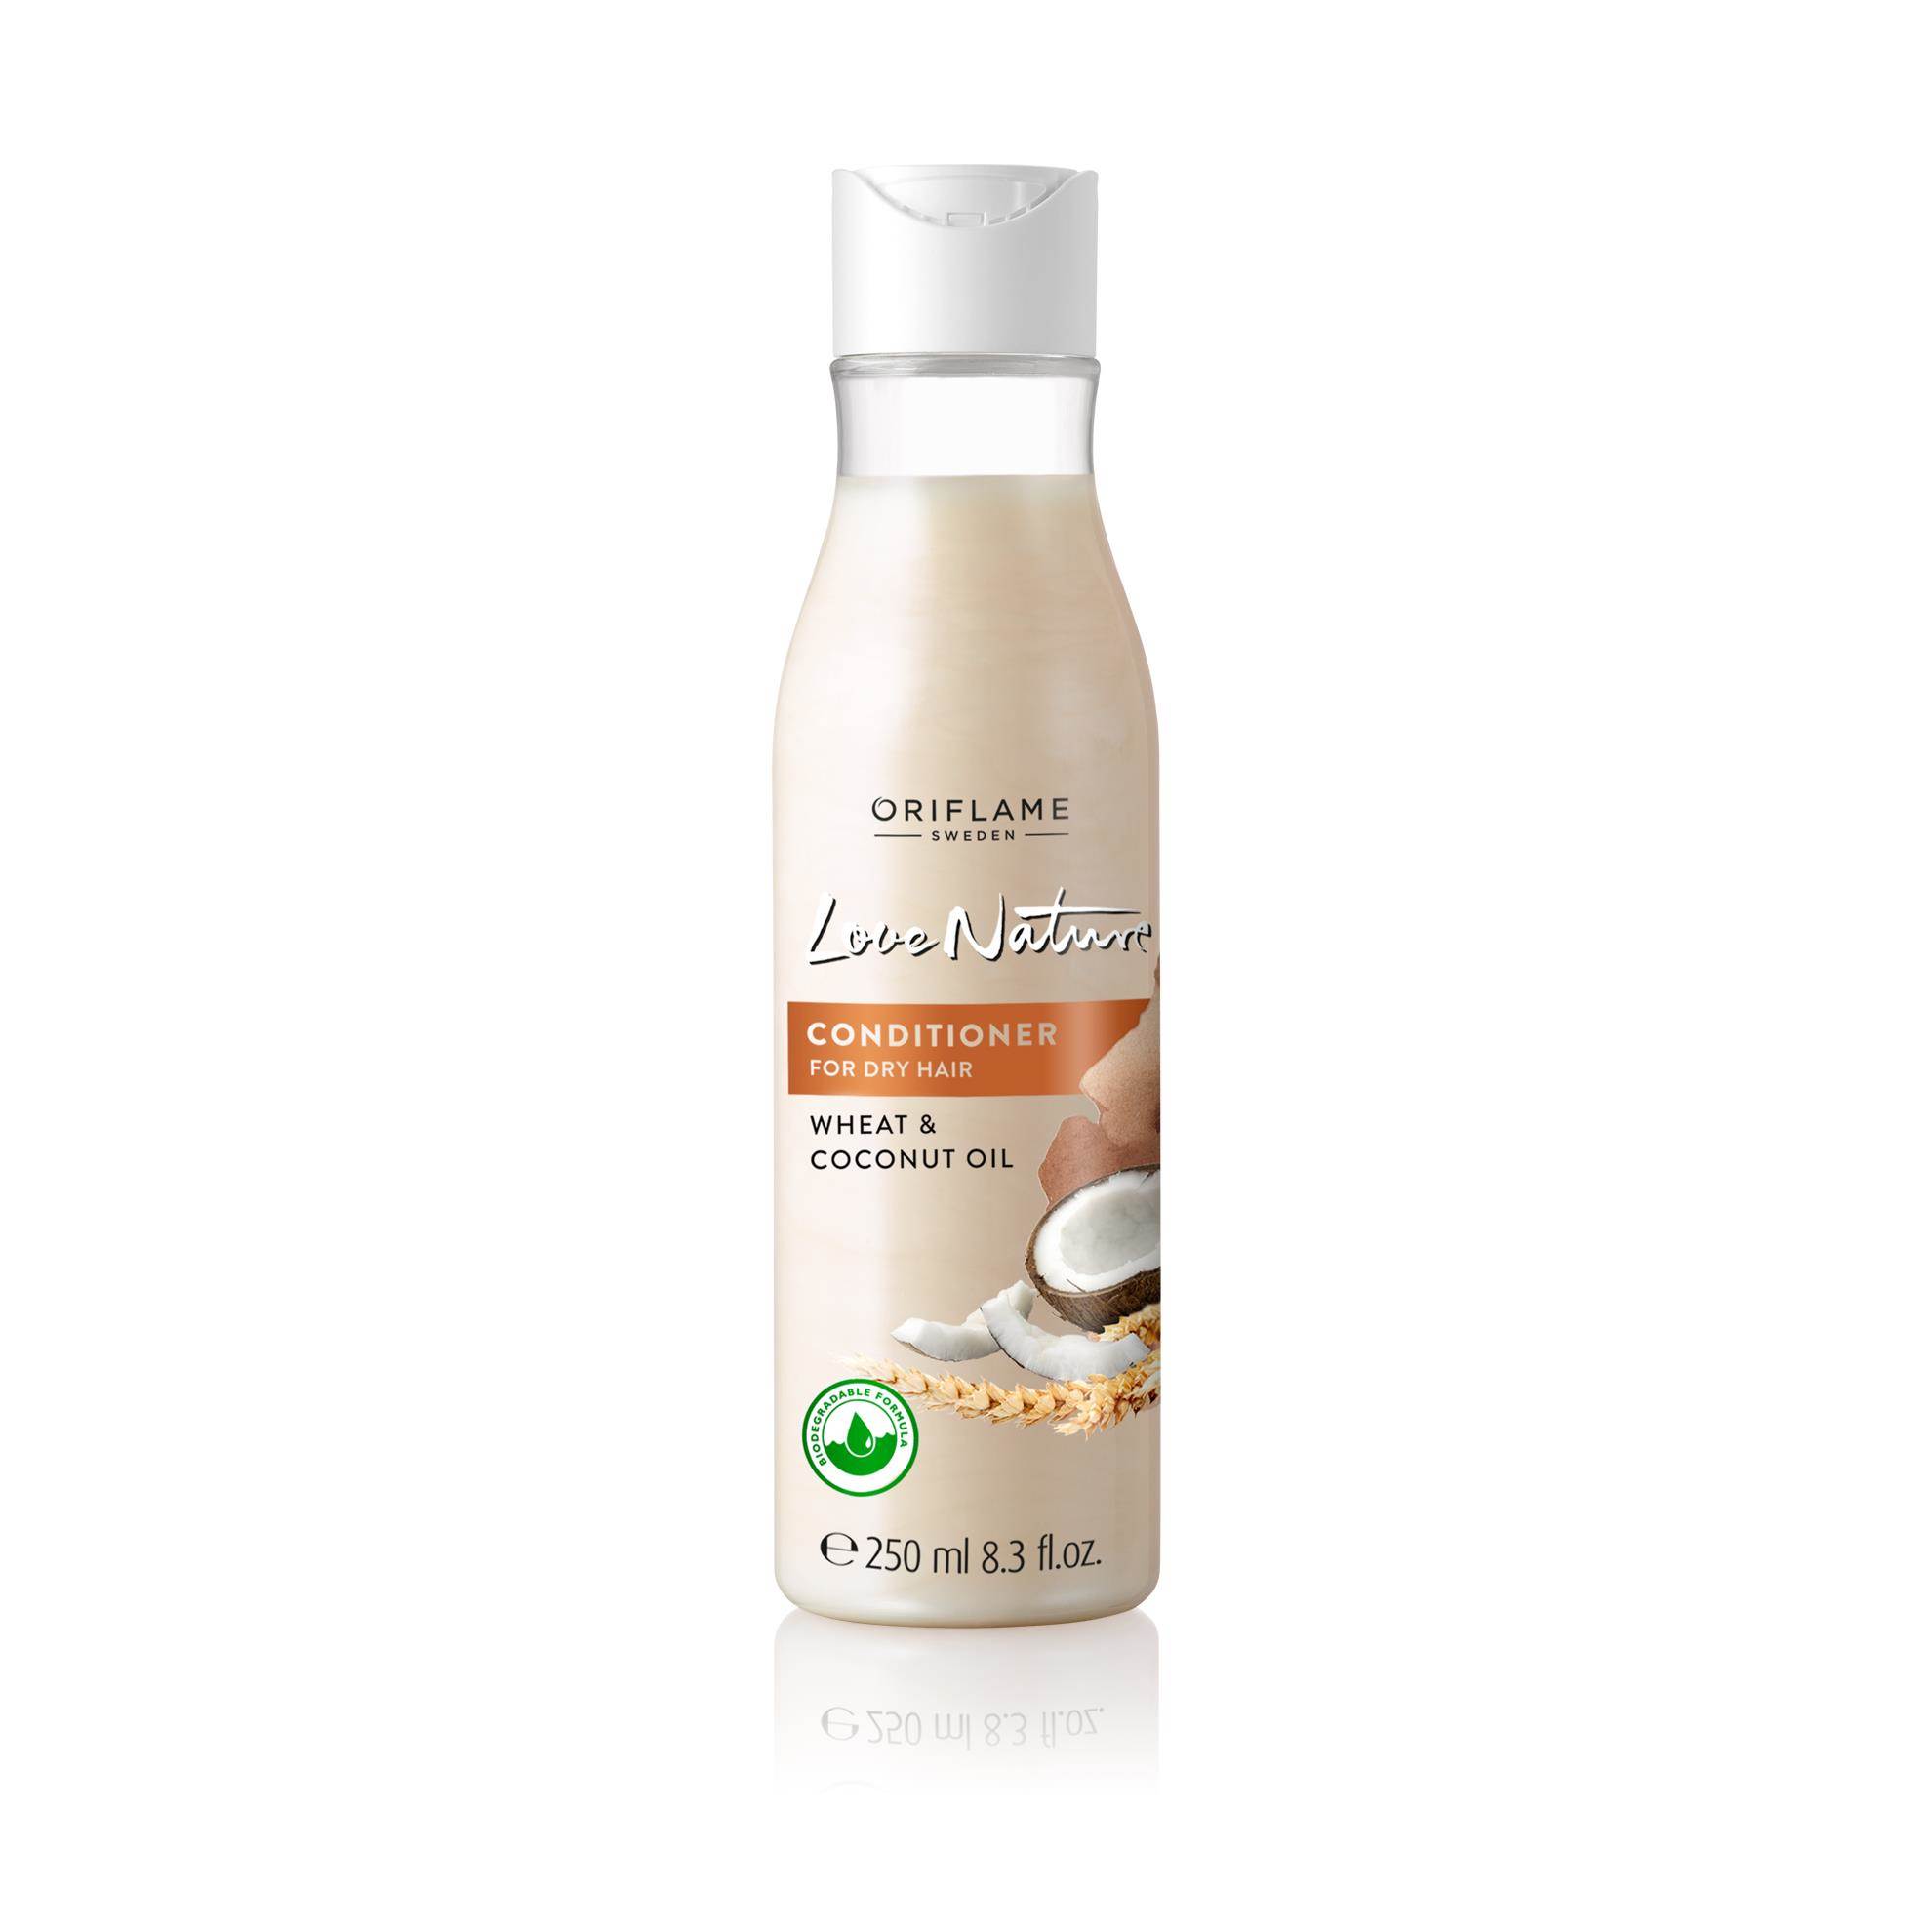 love-nature-conditioner-for-dry-hair-wheat-coconut-oil